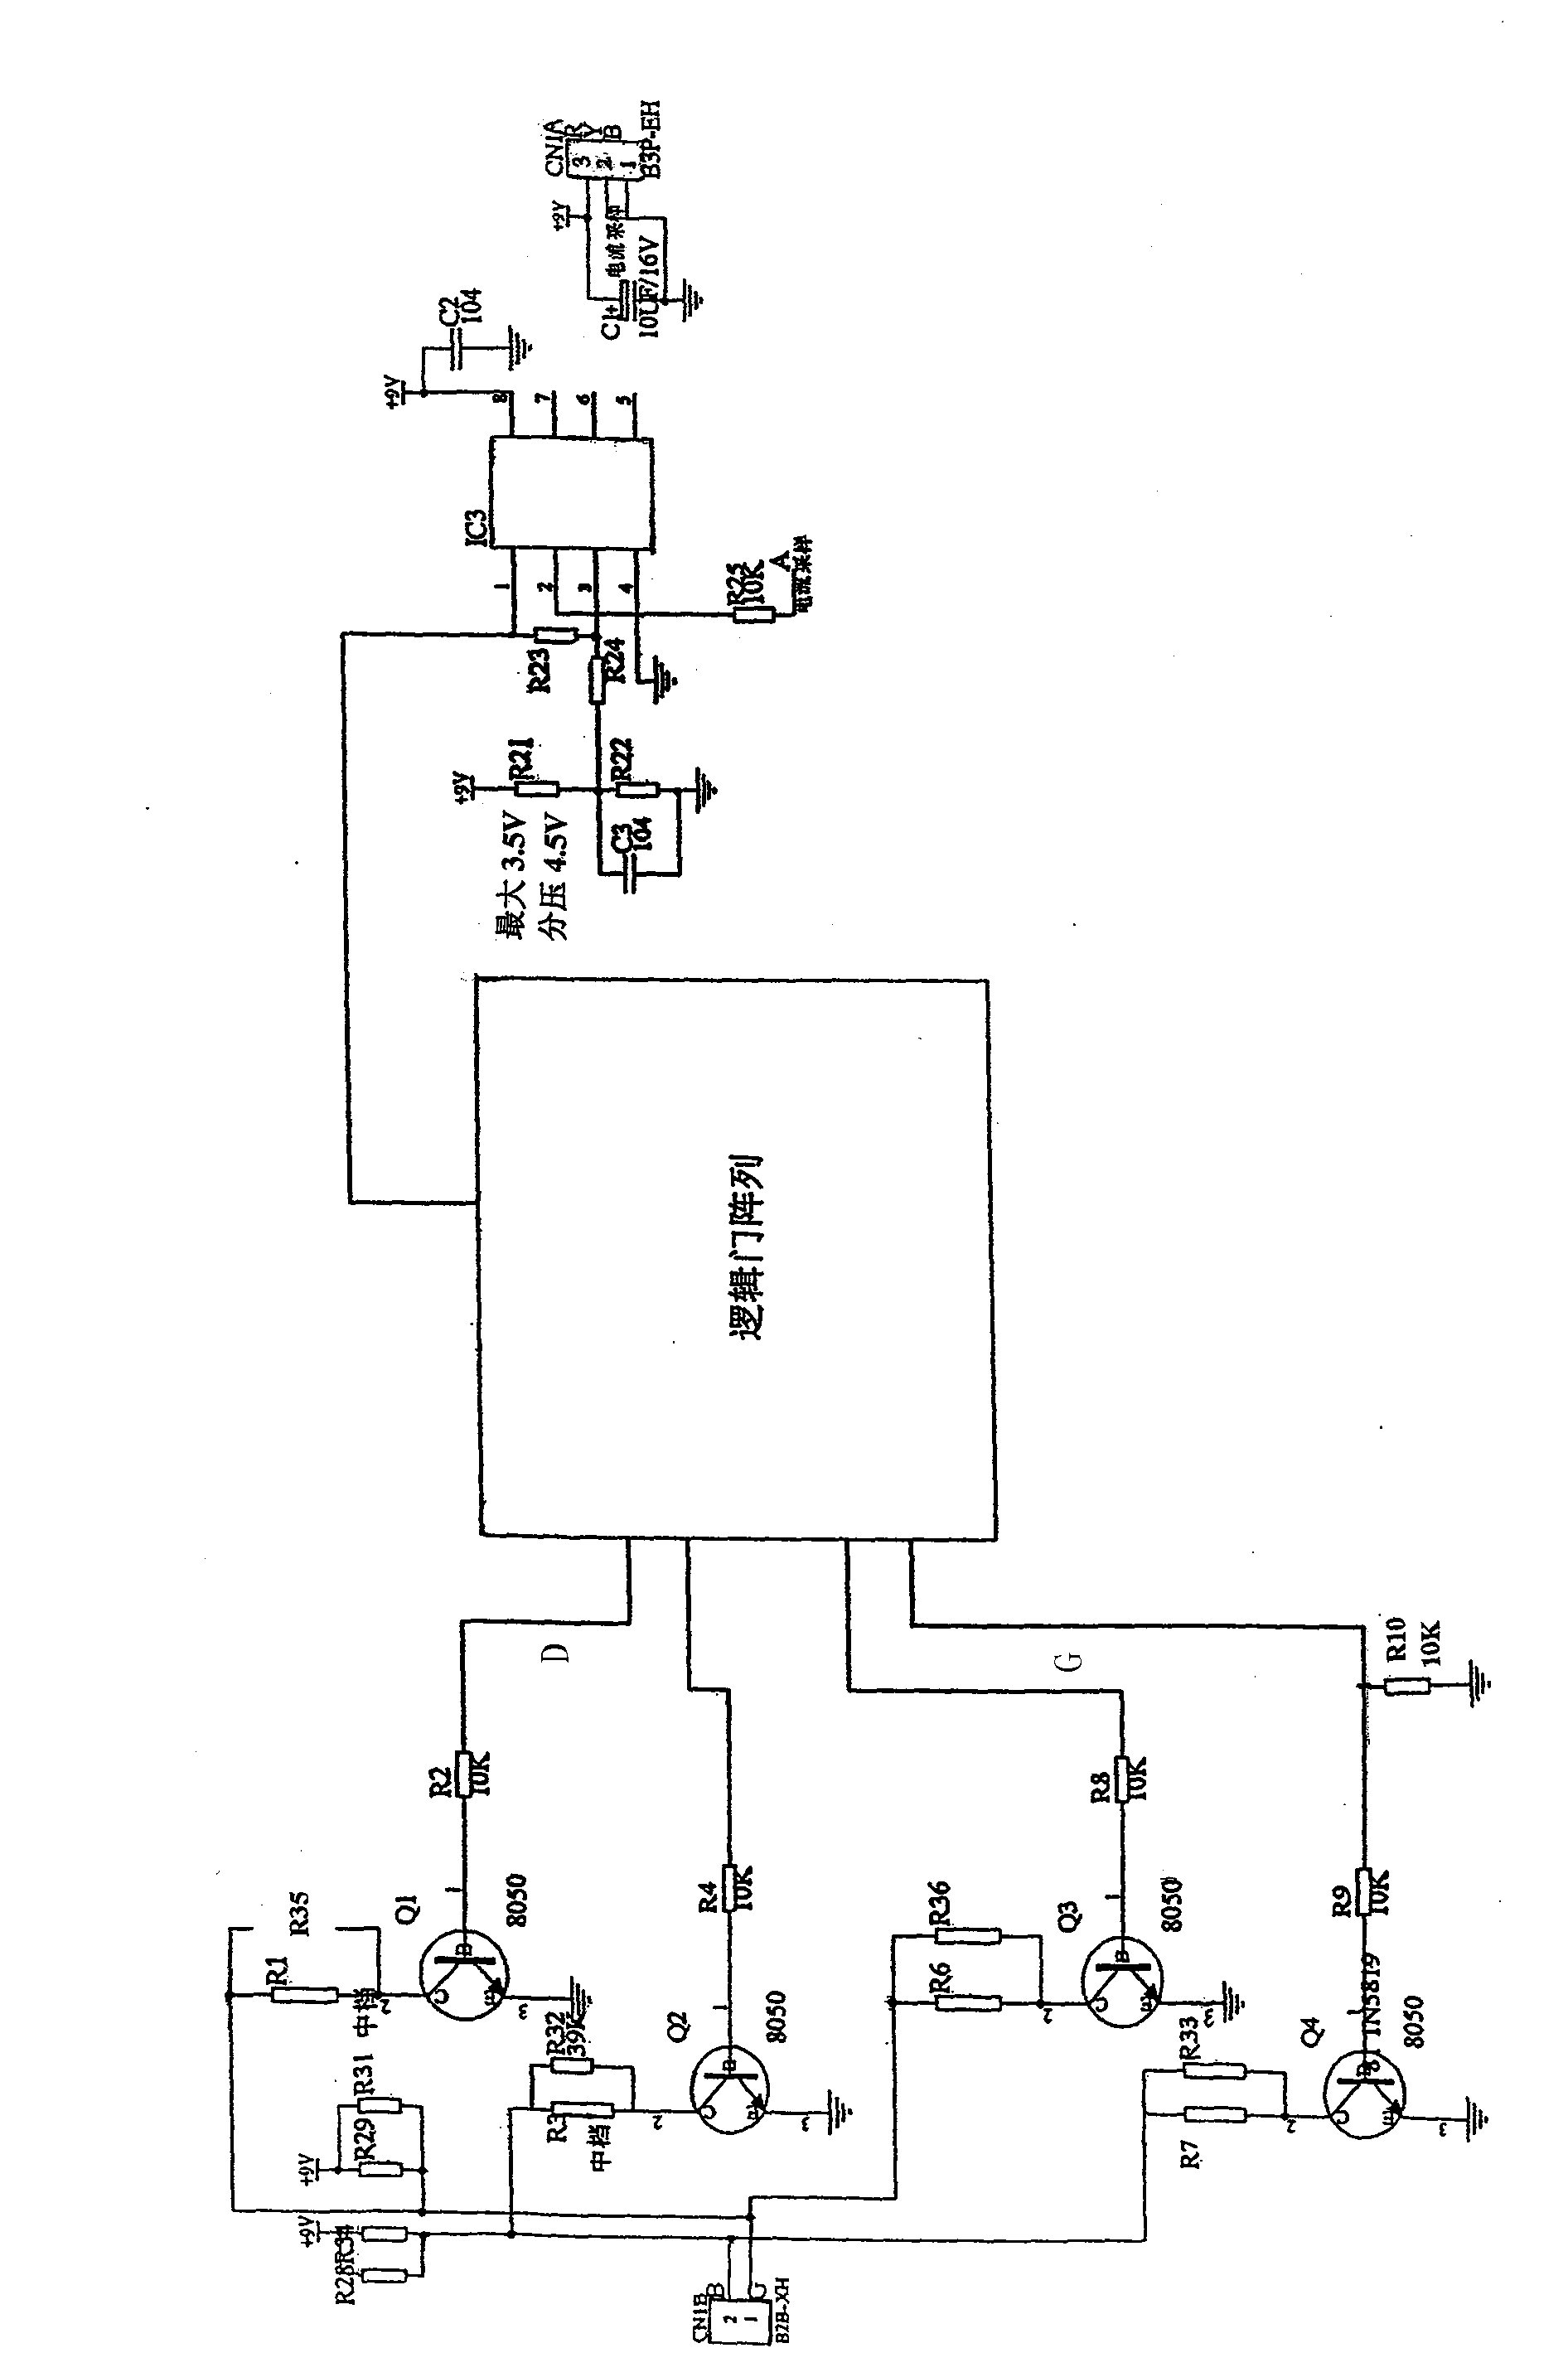 High-voltage power supply of electrostatic dust collector